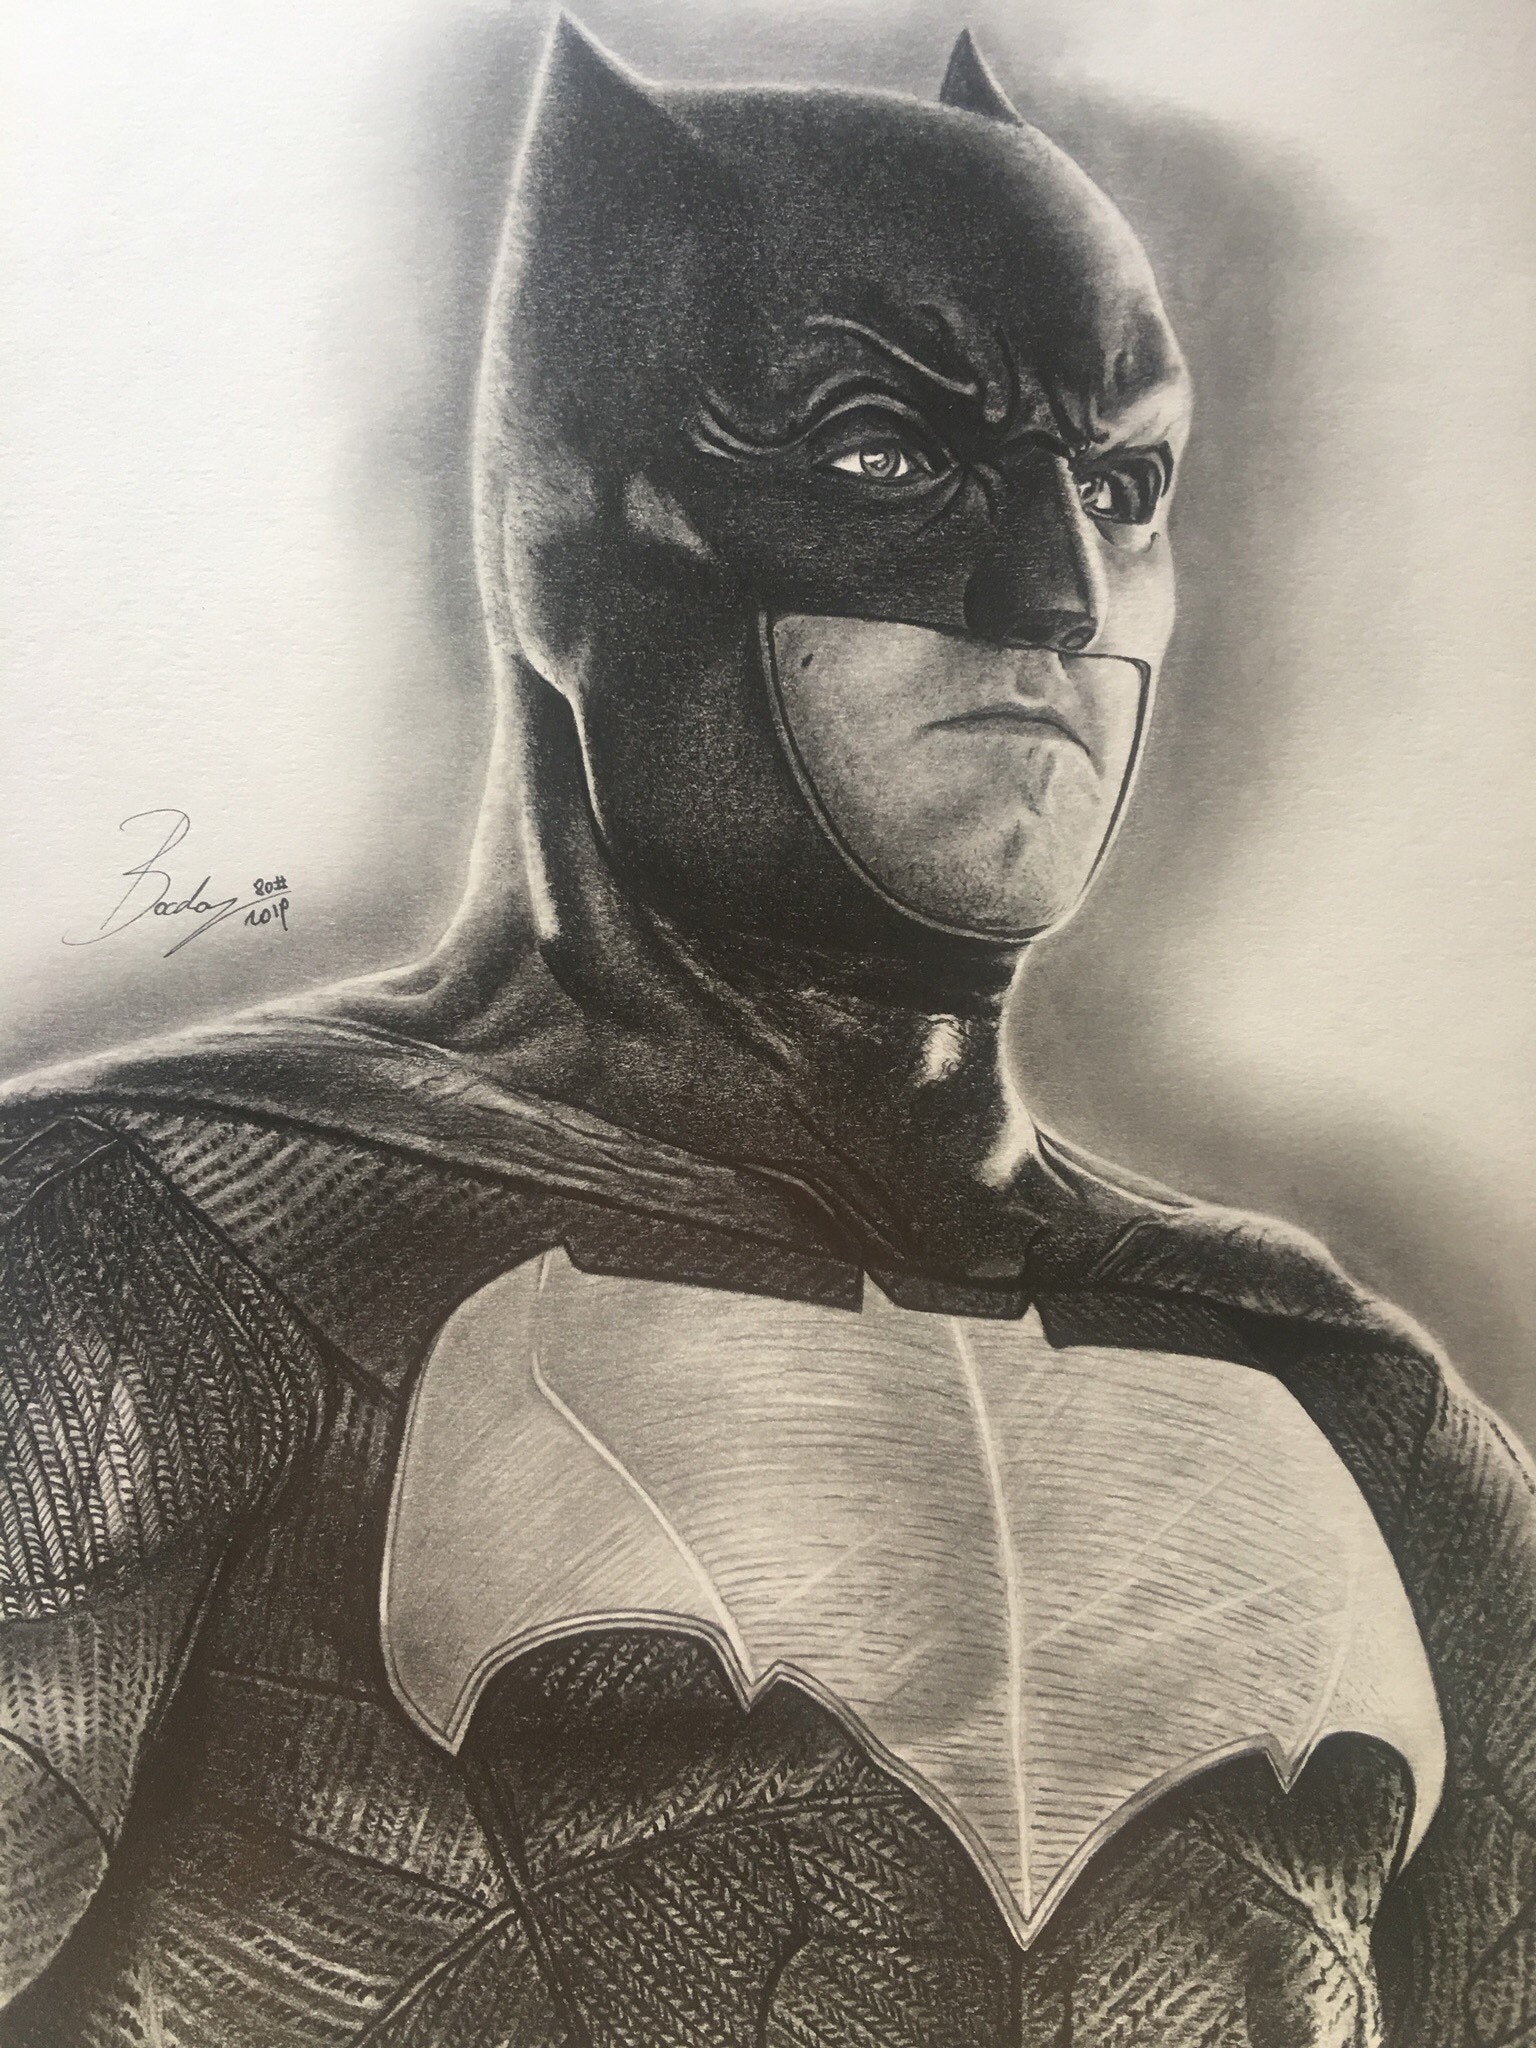 The Batman Drawing (17 hours; Pencil on paper) : r/drawing